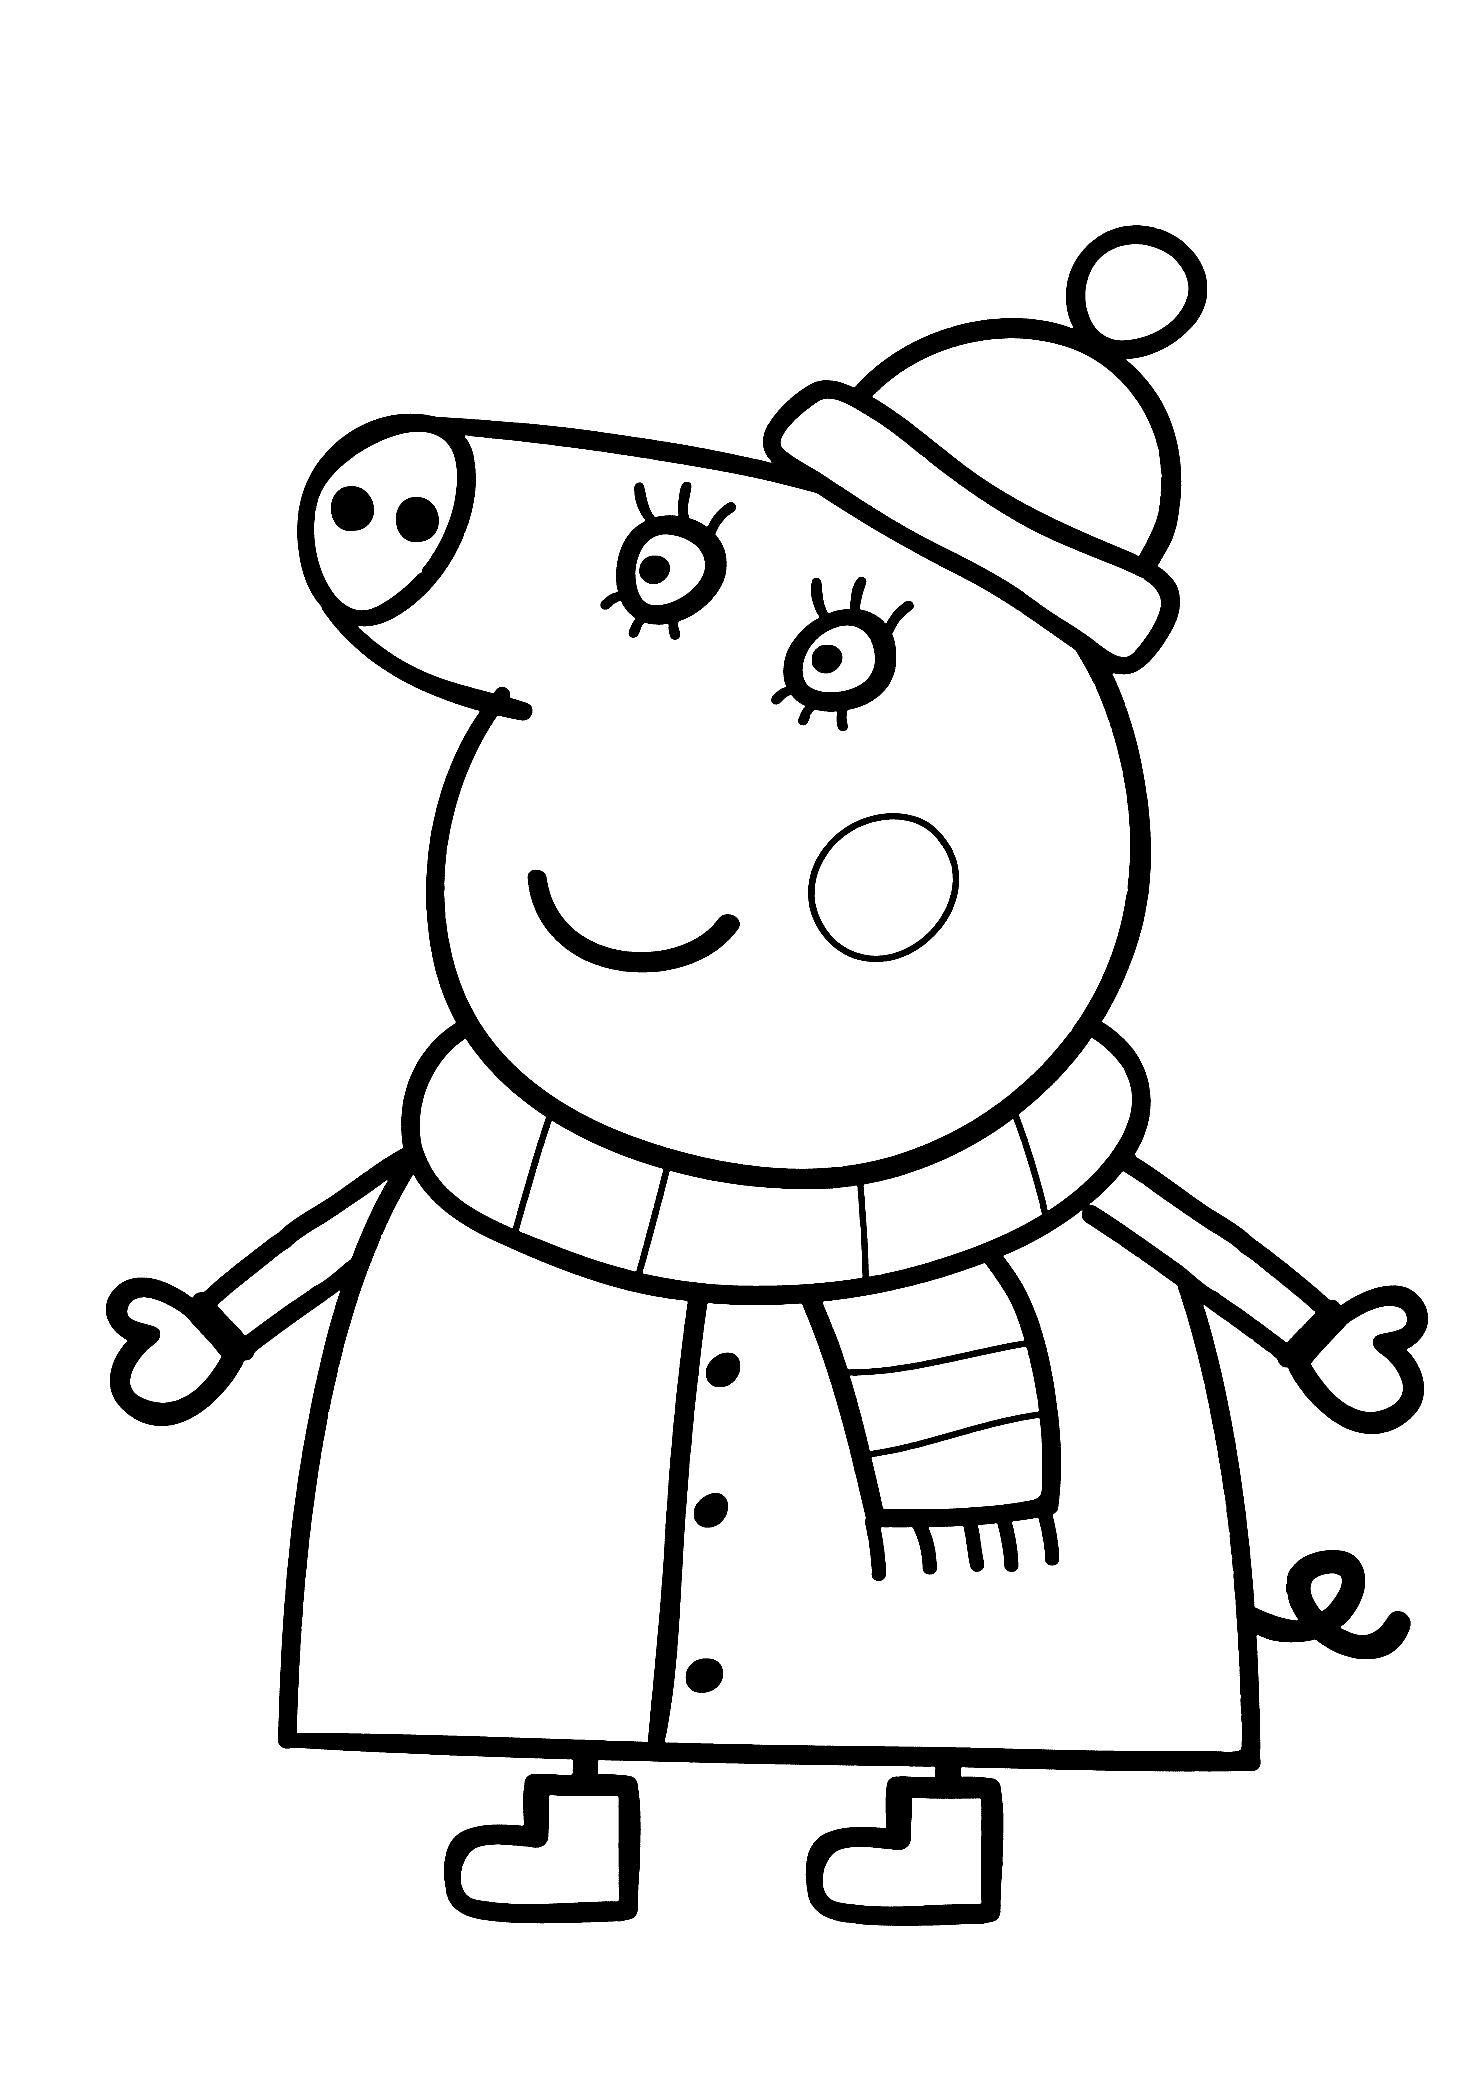 Peppa Pig George Colouring Pages: Peppa Pig George Coloring Page ...